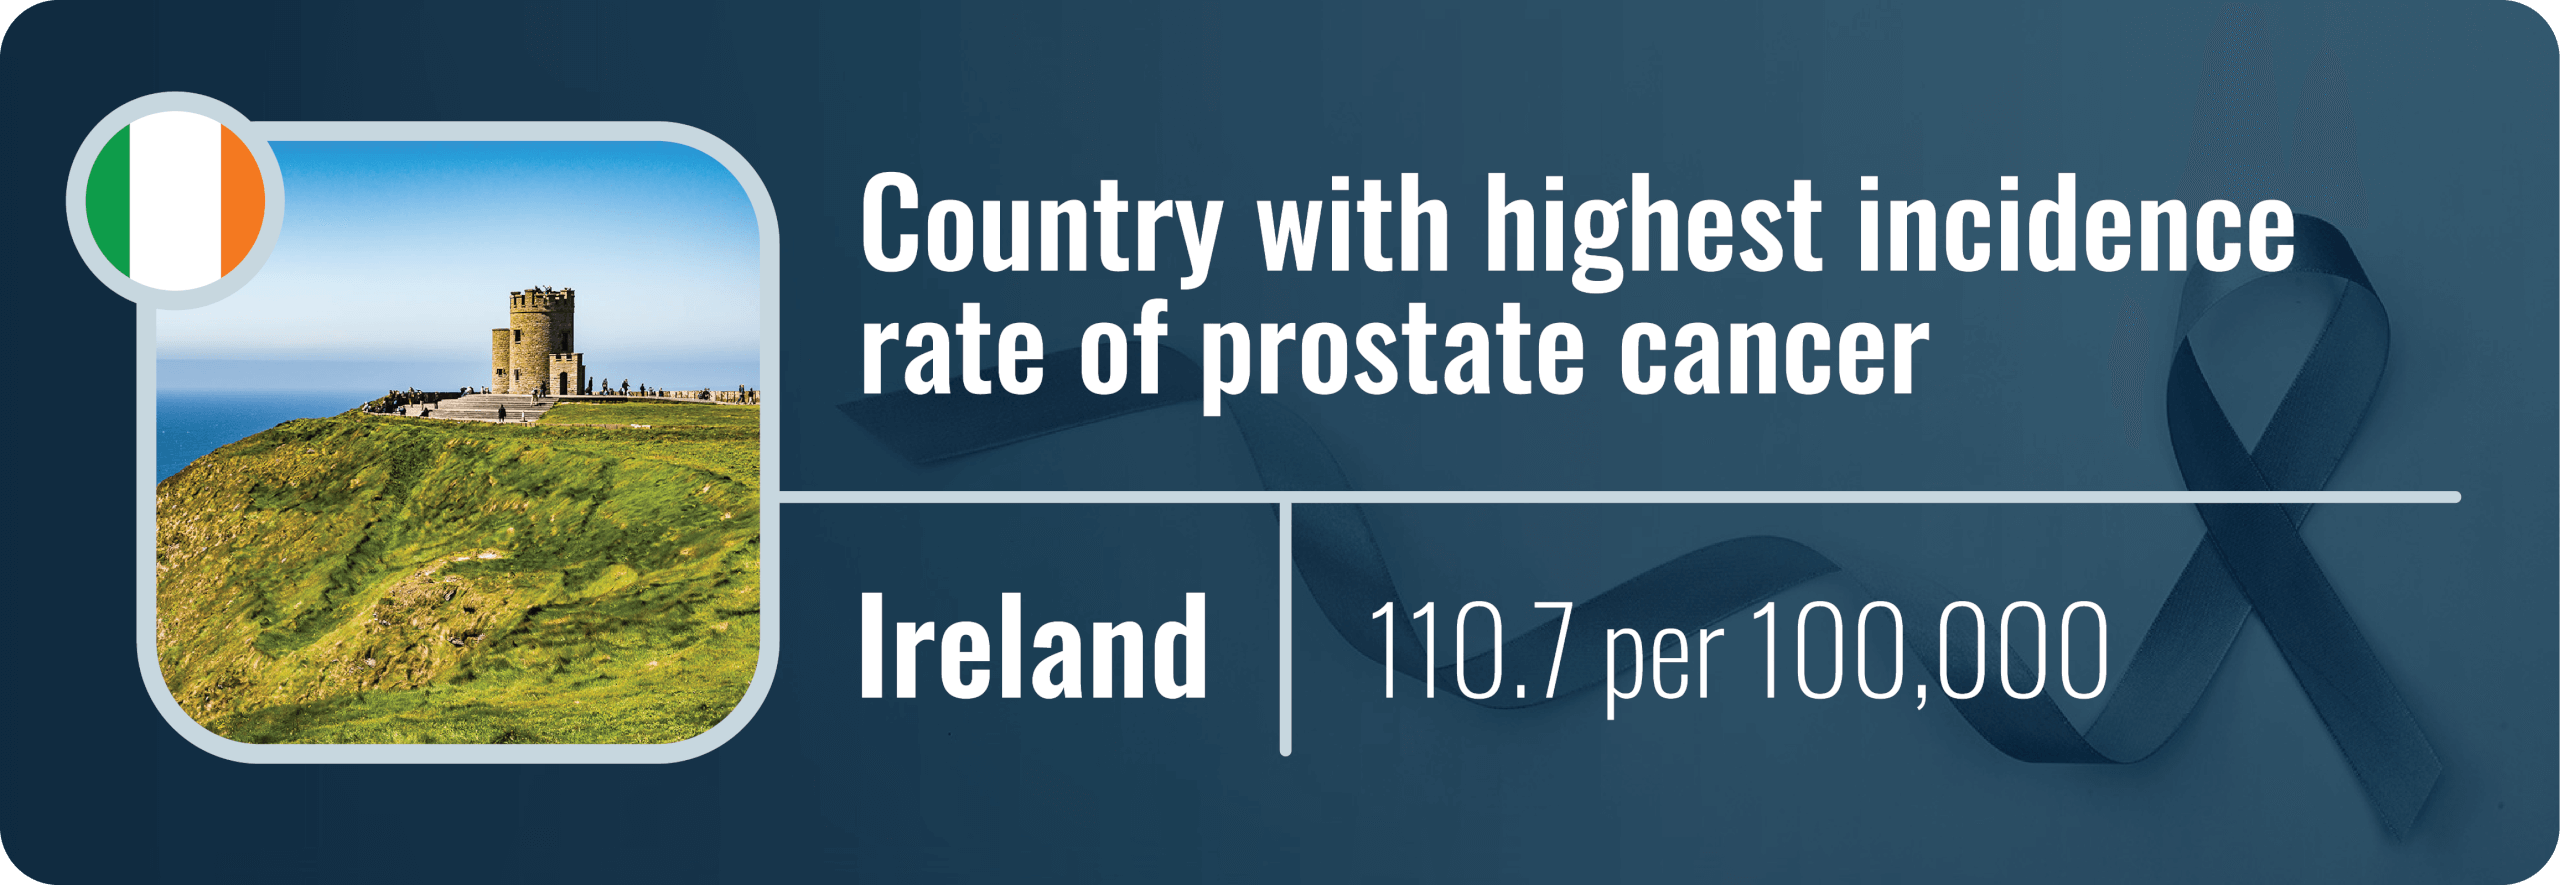 An infographic showing the country with the highest prostate cancer rate